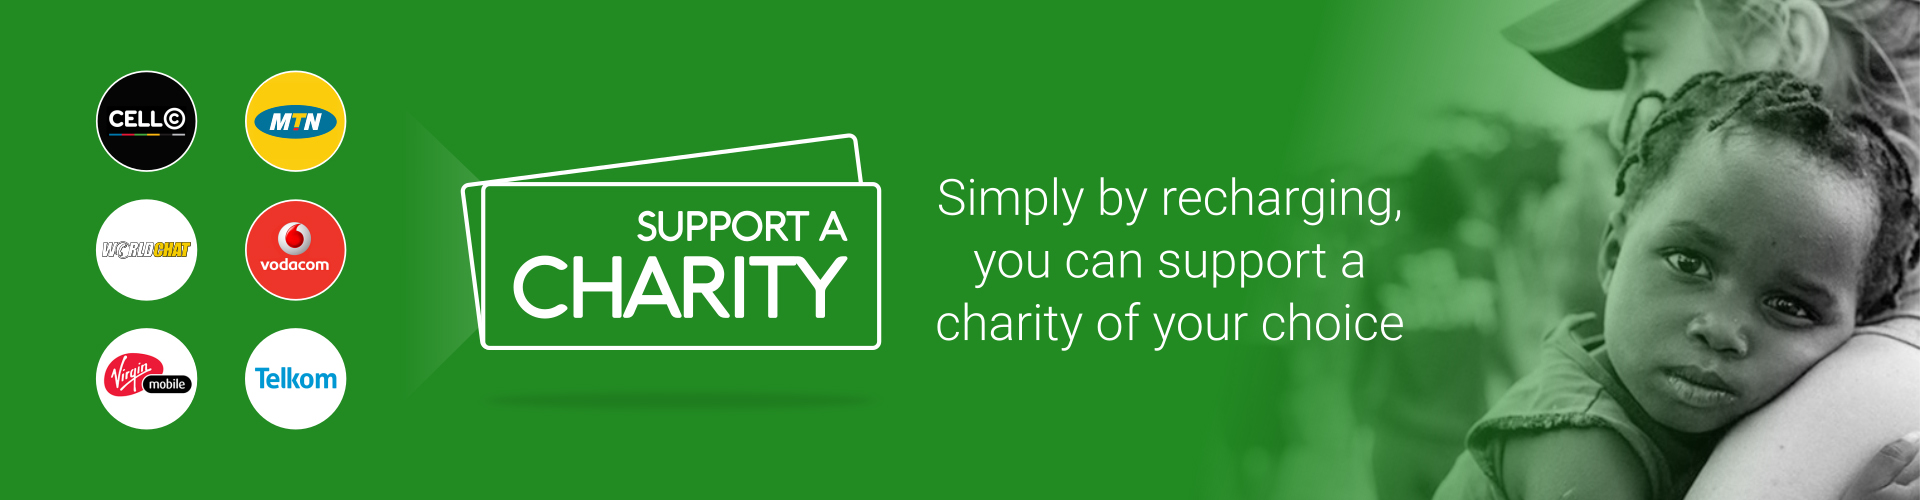 Charity Airtime - Buy airtime to support a charity